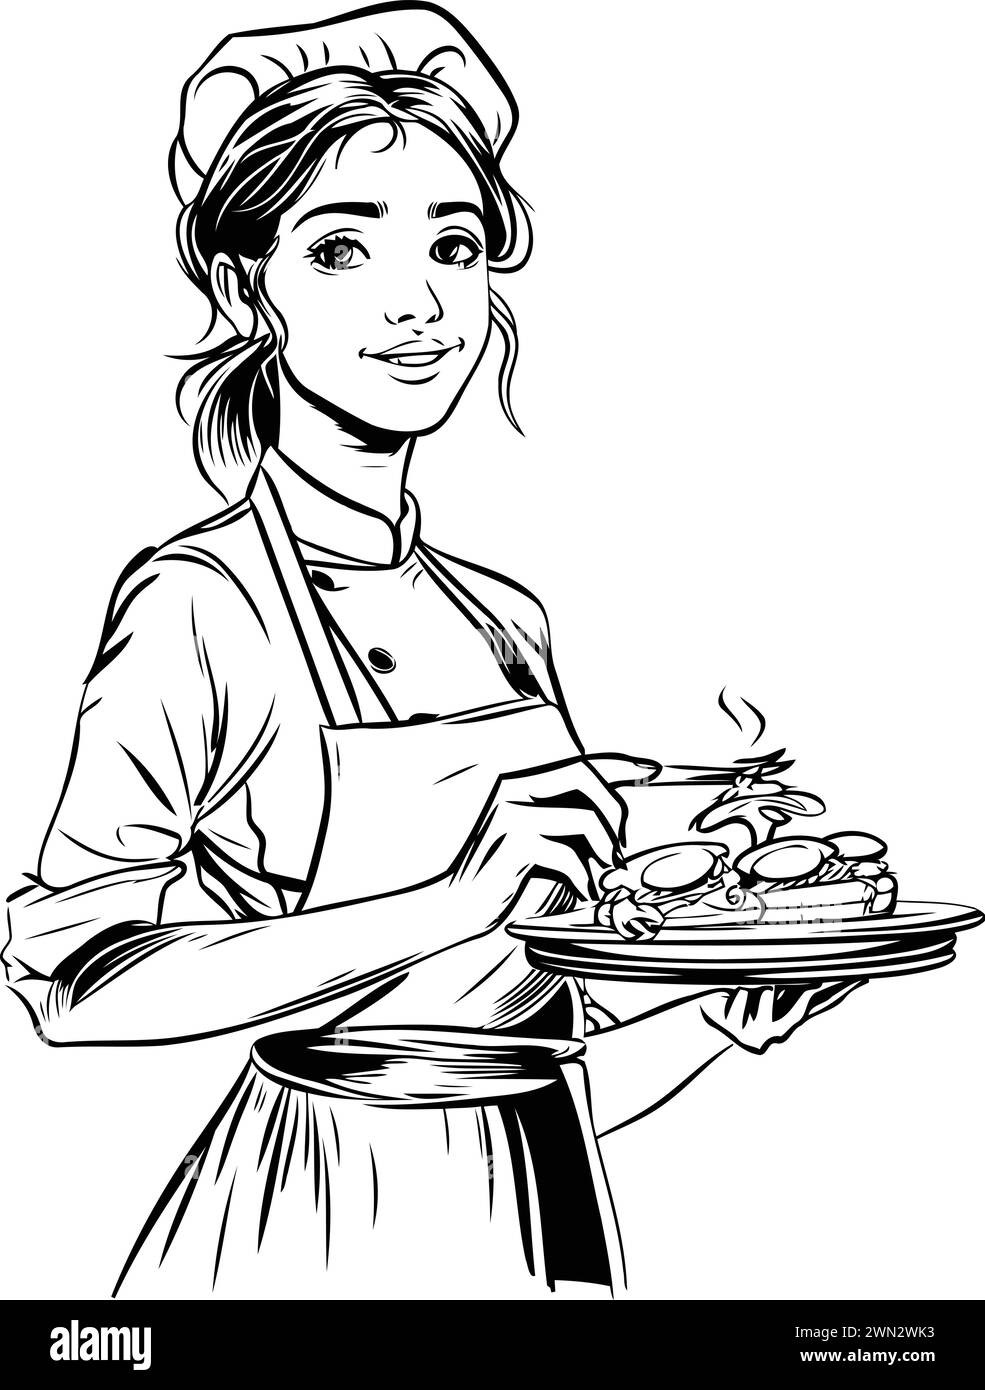 Vector illustration of a young woman cook with a plate of food. Stock Vector